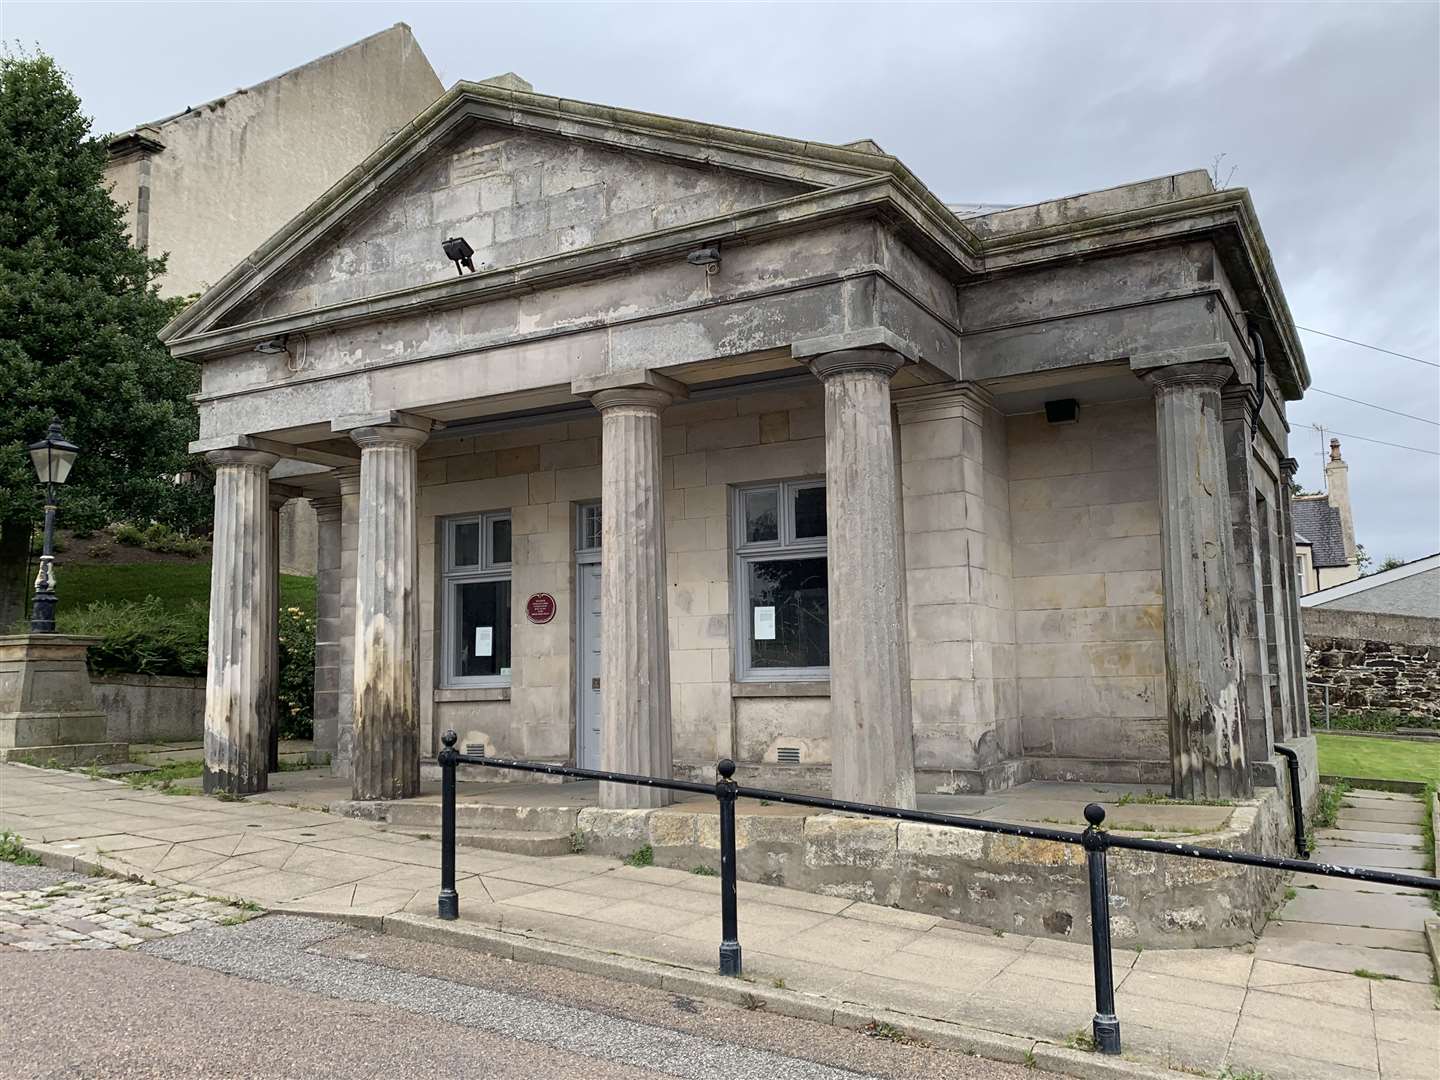 Plans have been submitted to turn the former tourist information centre in Banff into a coffee shop.